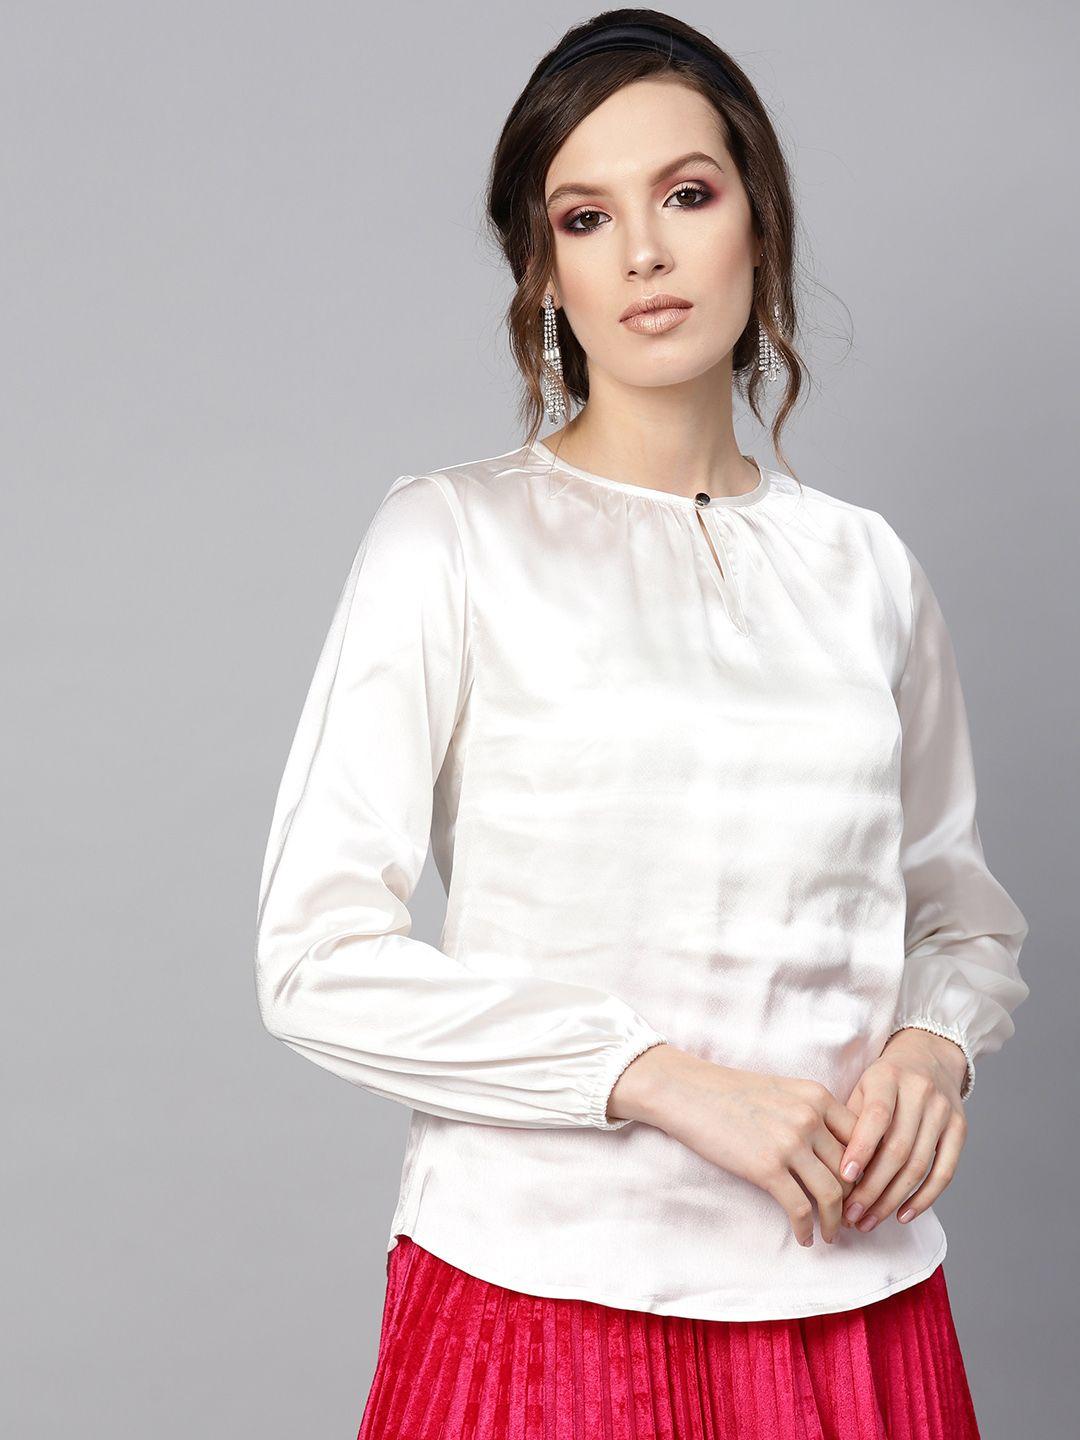 sassafras women off-white solid top with satin finish